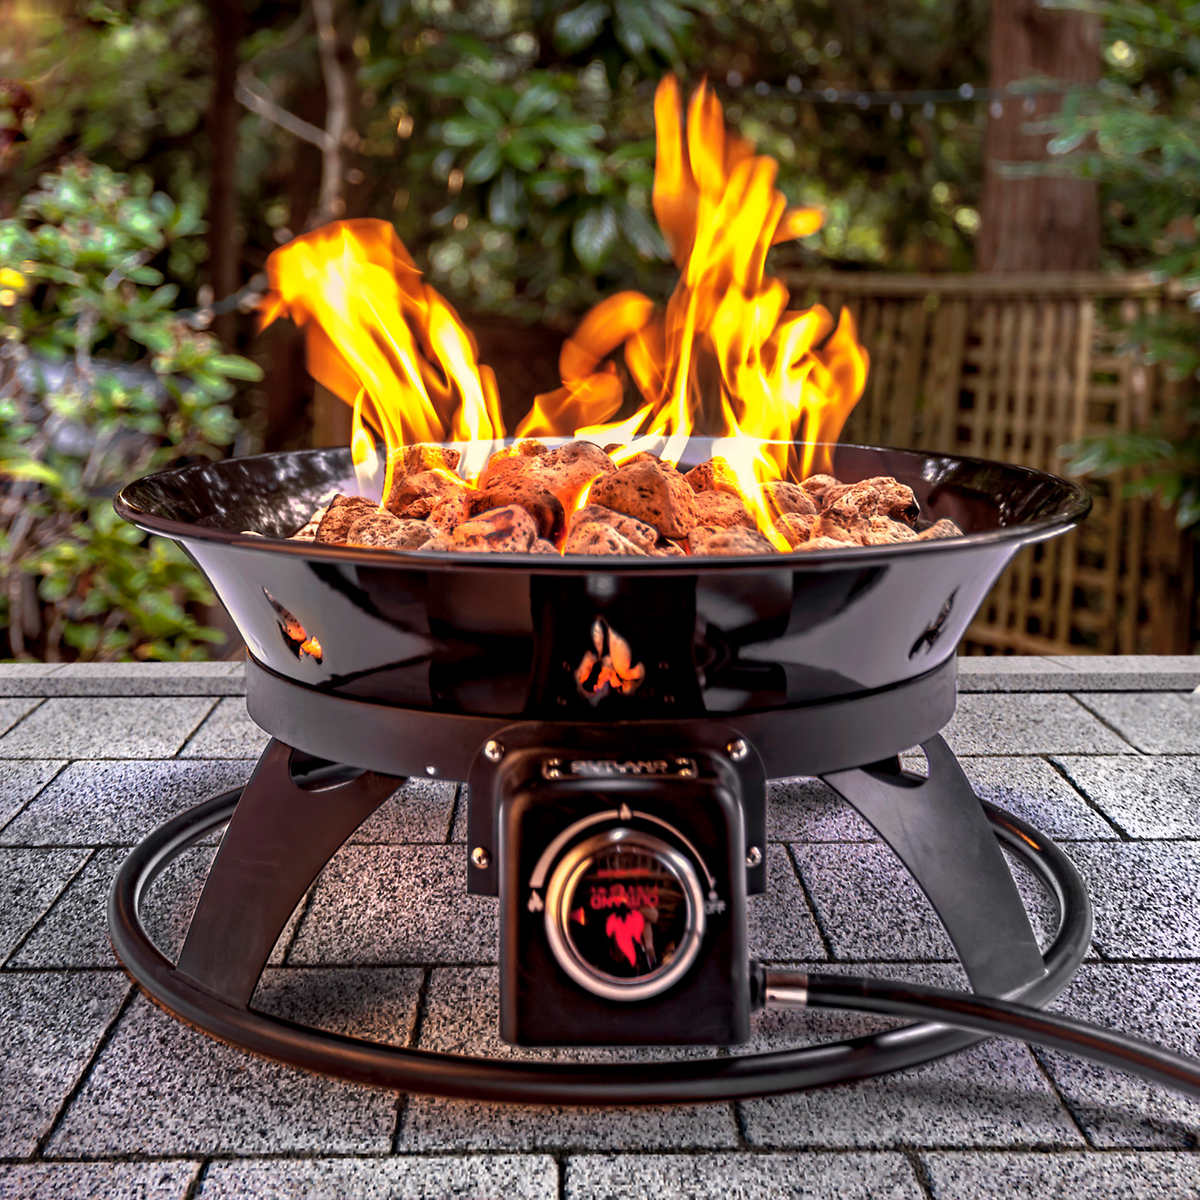 Outland Firebowl Outdoor Firepit Costco, Propane Fire Pit Instructions